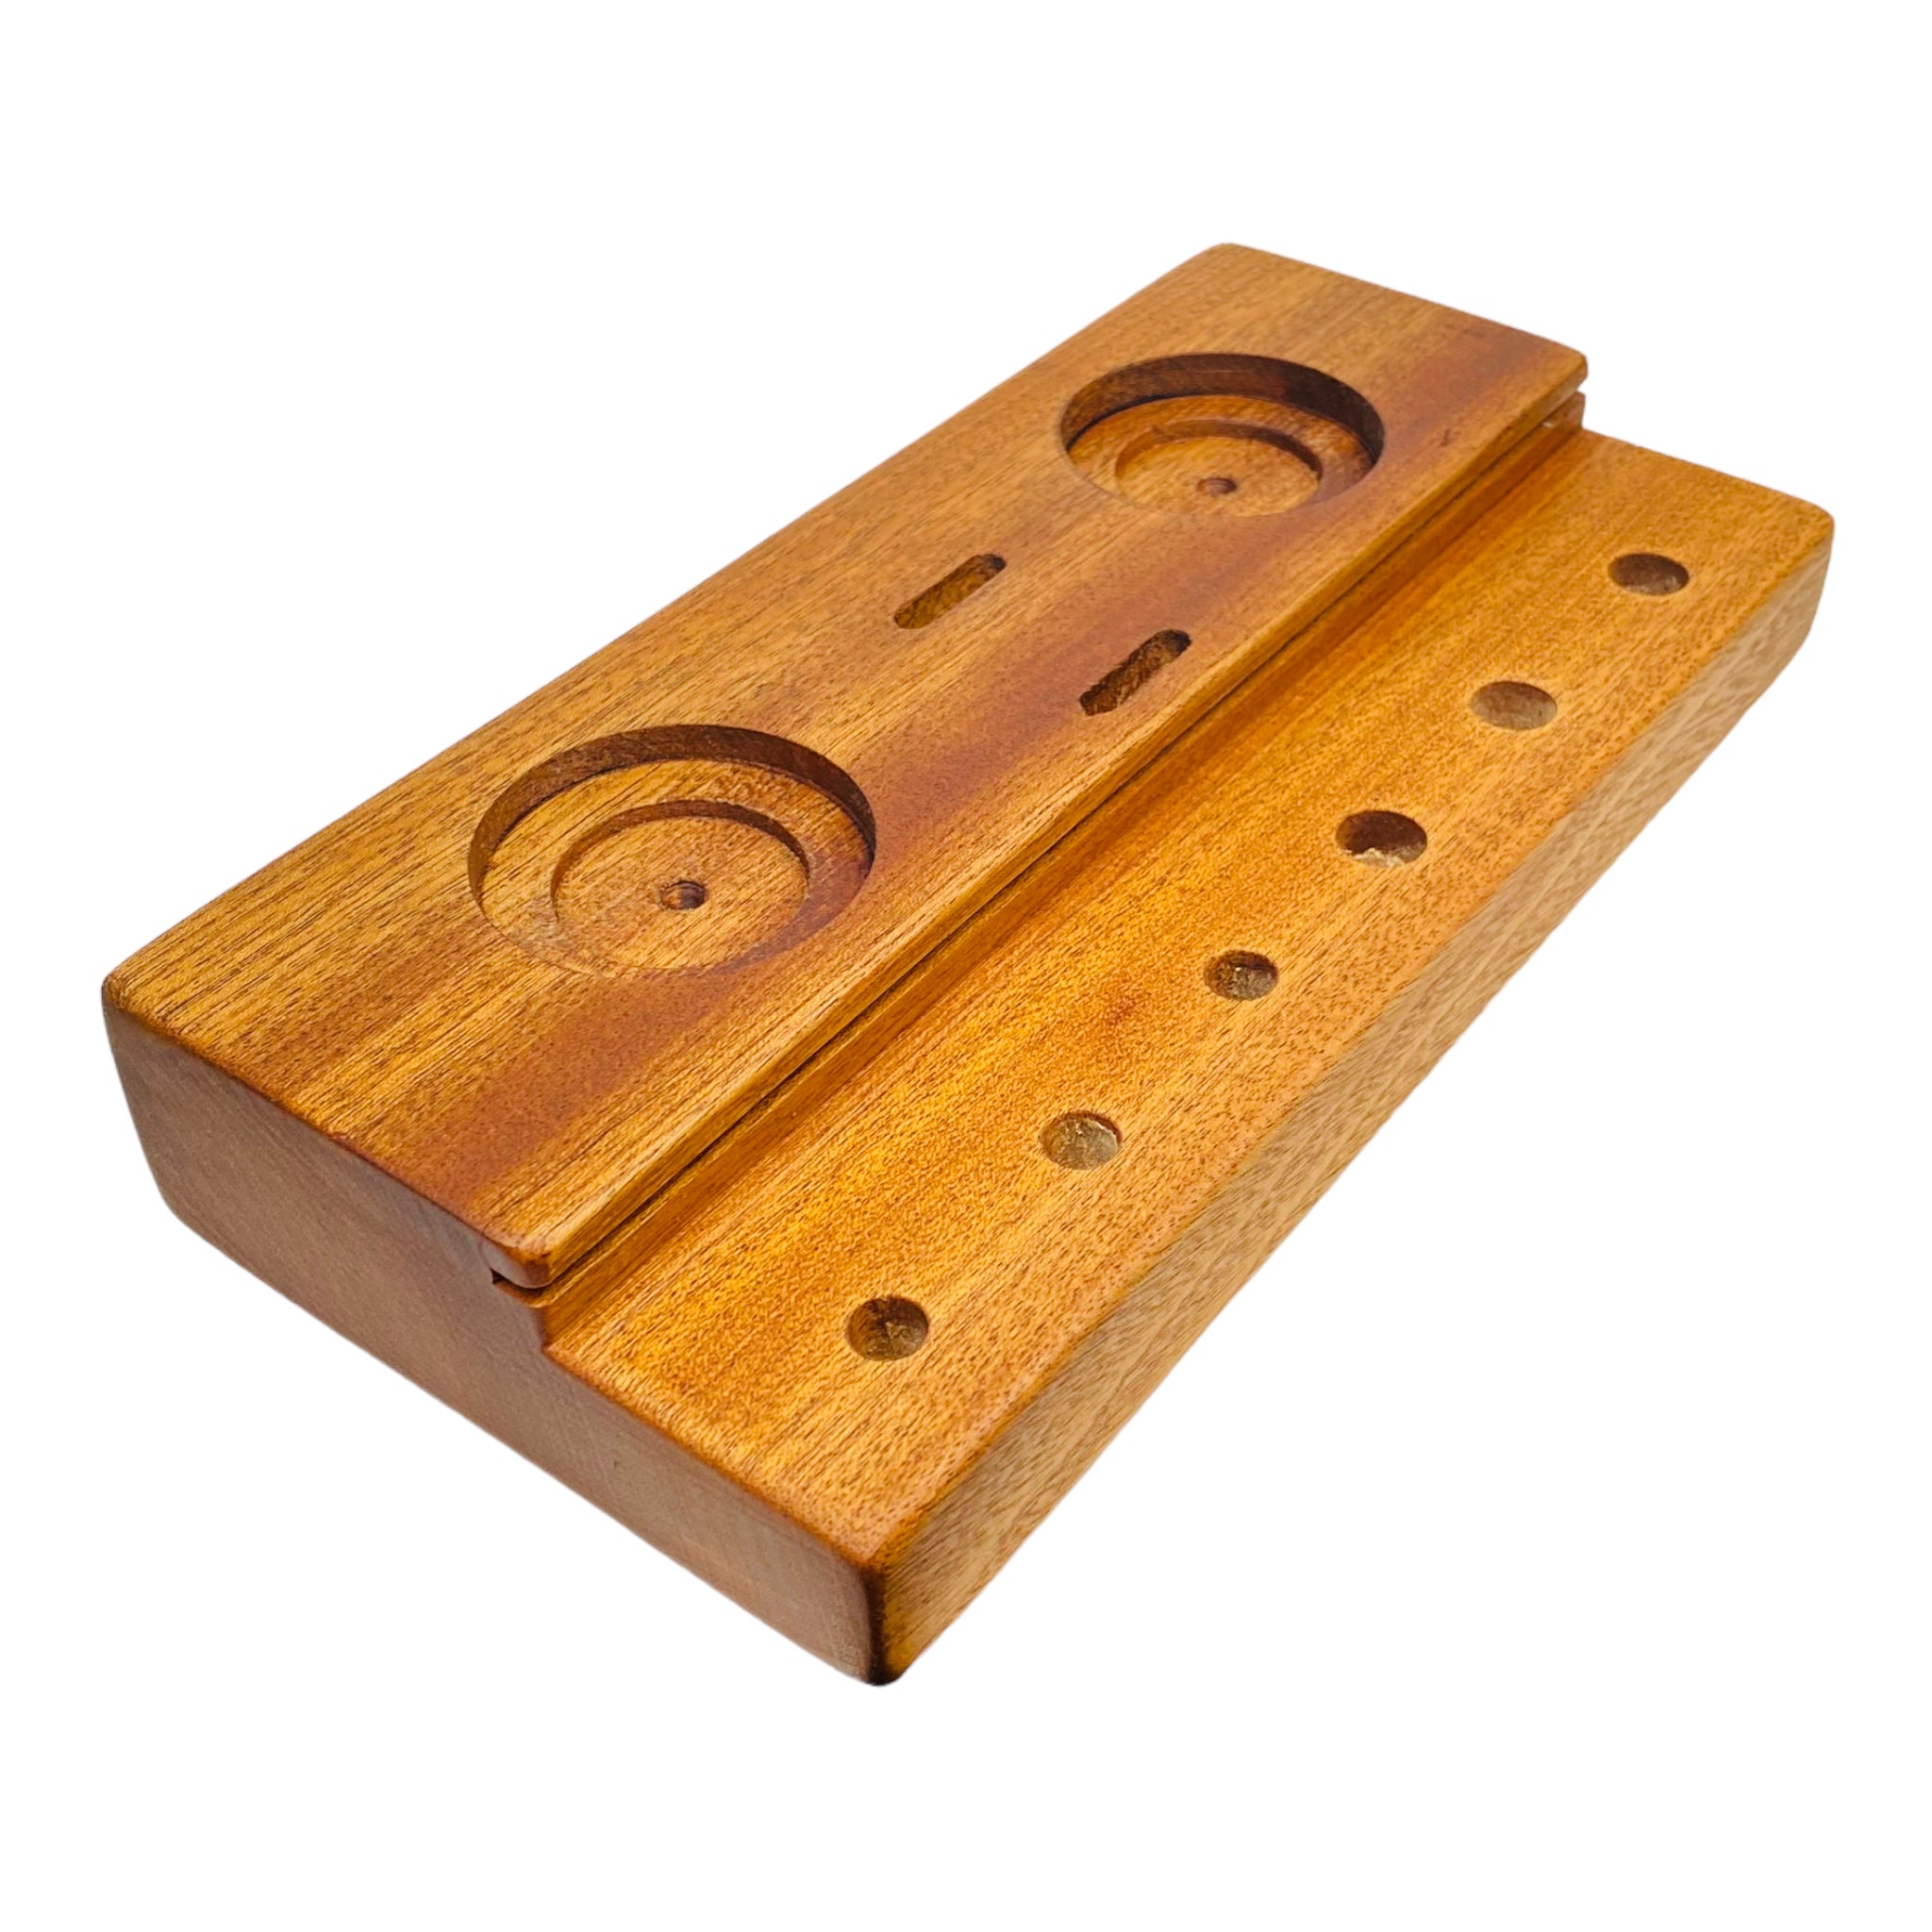 This Multi Hole Wood Dab Station And Display Stand Holder is made from premium mahogany and features two different sized holes for jars, two slots to hold Q Tips, and three 10mm and 14mm holes to hold various bong bowl pieces or quartz bangers. A perfect storage solution for the dab connoisseur.